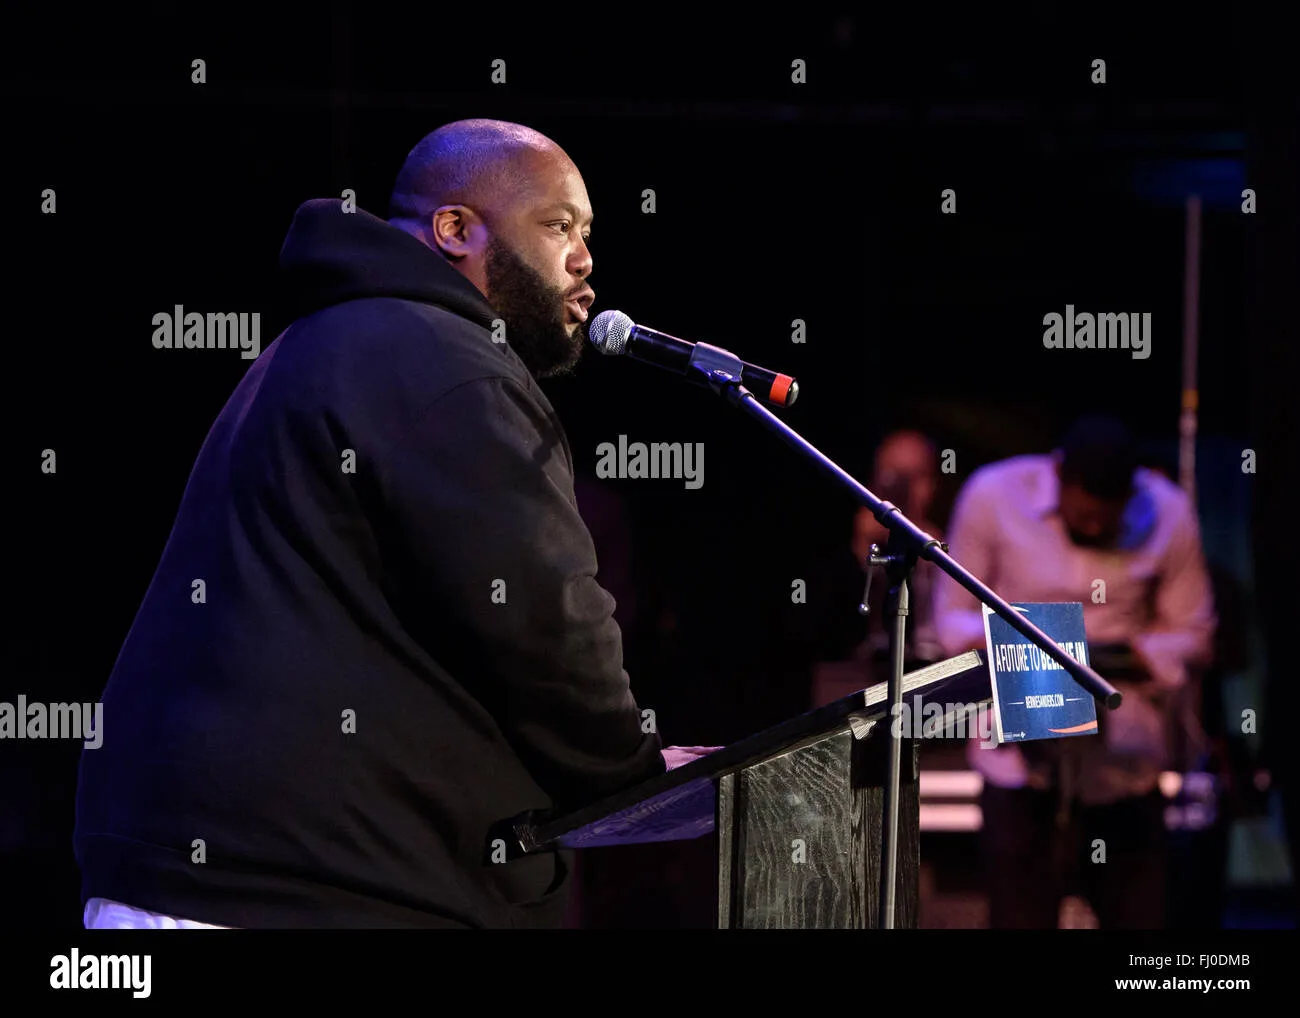 Rapper Killer Mike's 2024 Grammy Awards journey. On one side, the artist triumphantly stands on stage with three Grammy awards, symbolizing his musical achievements.